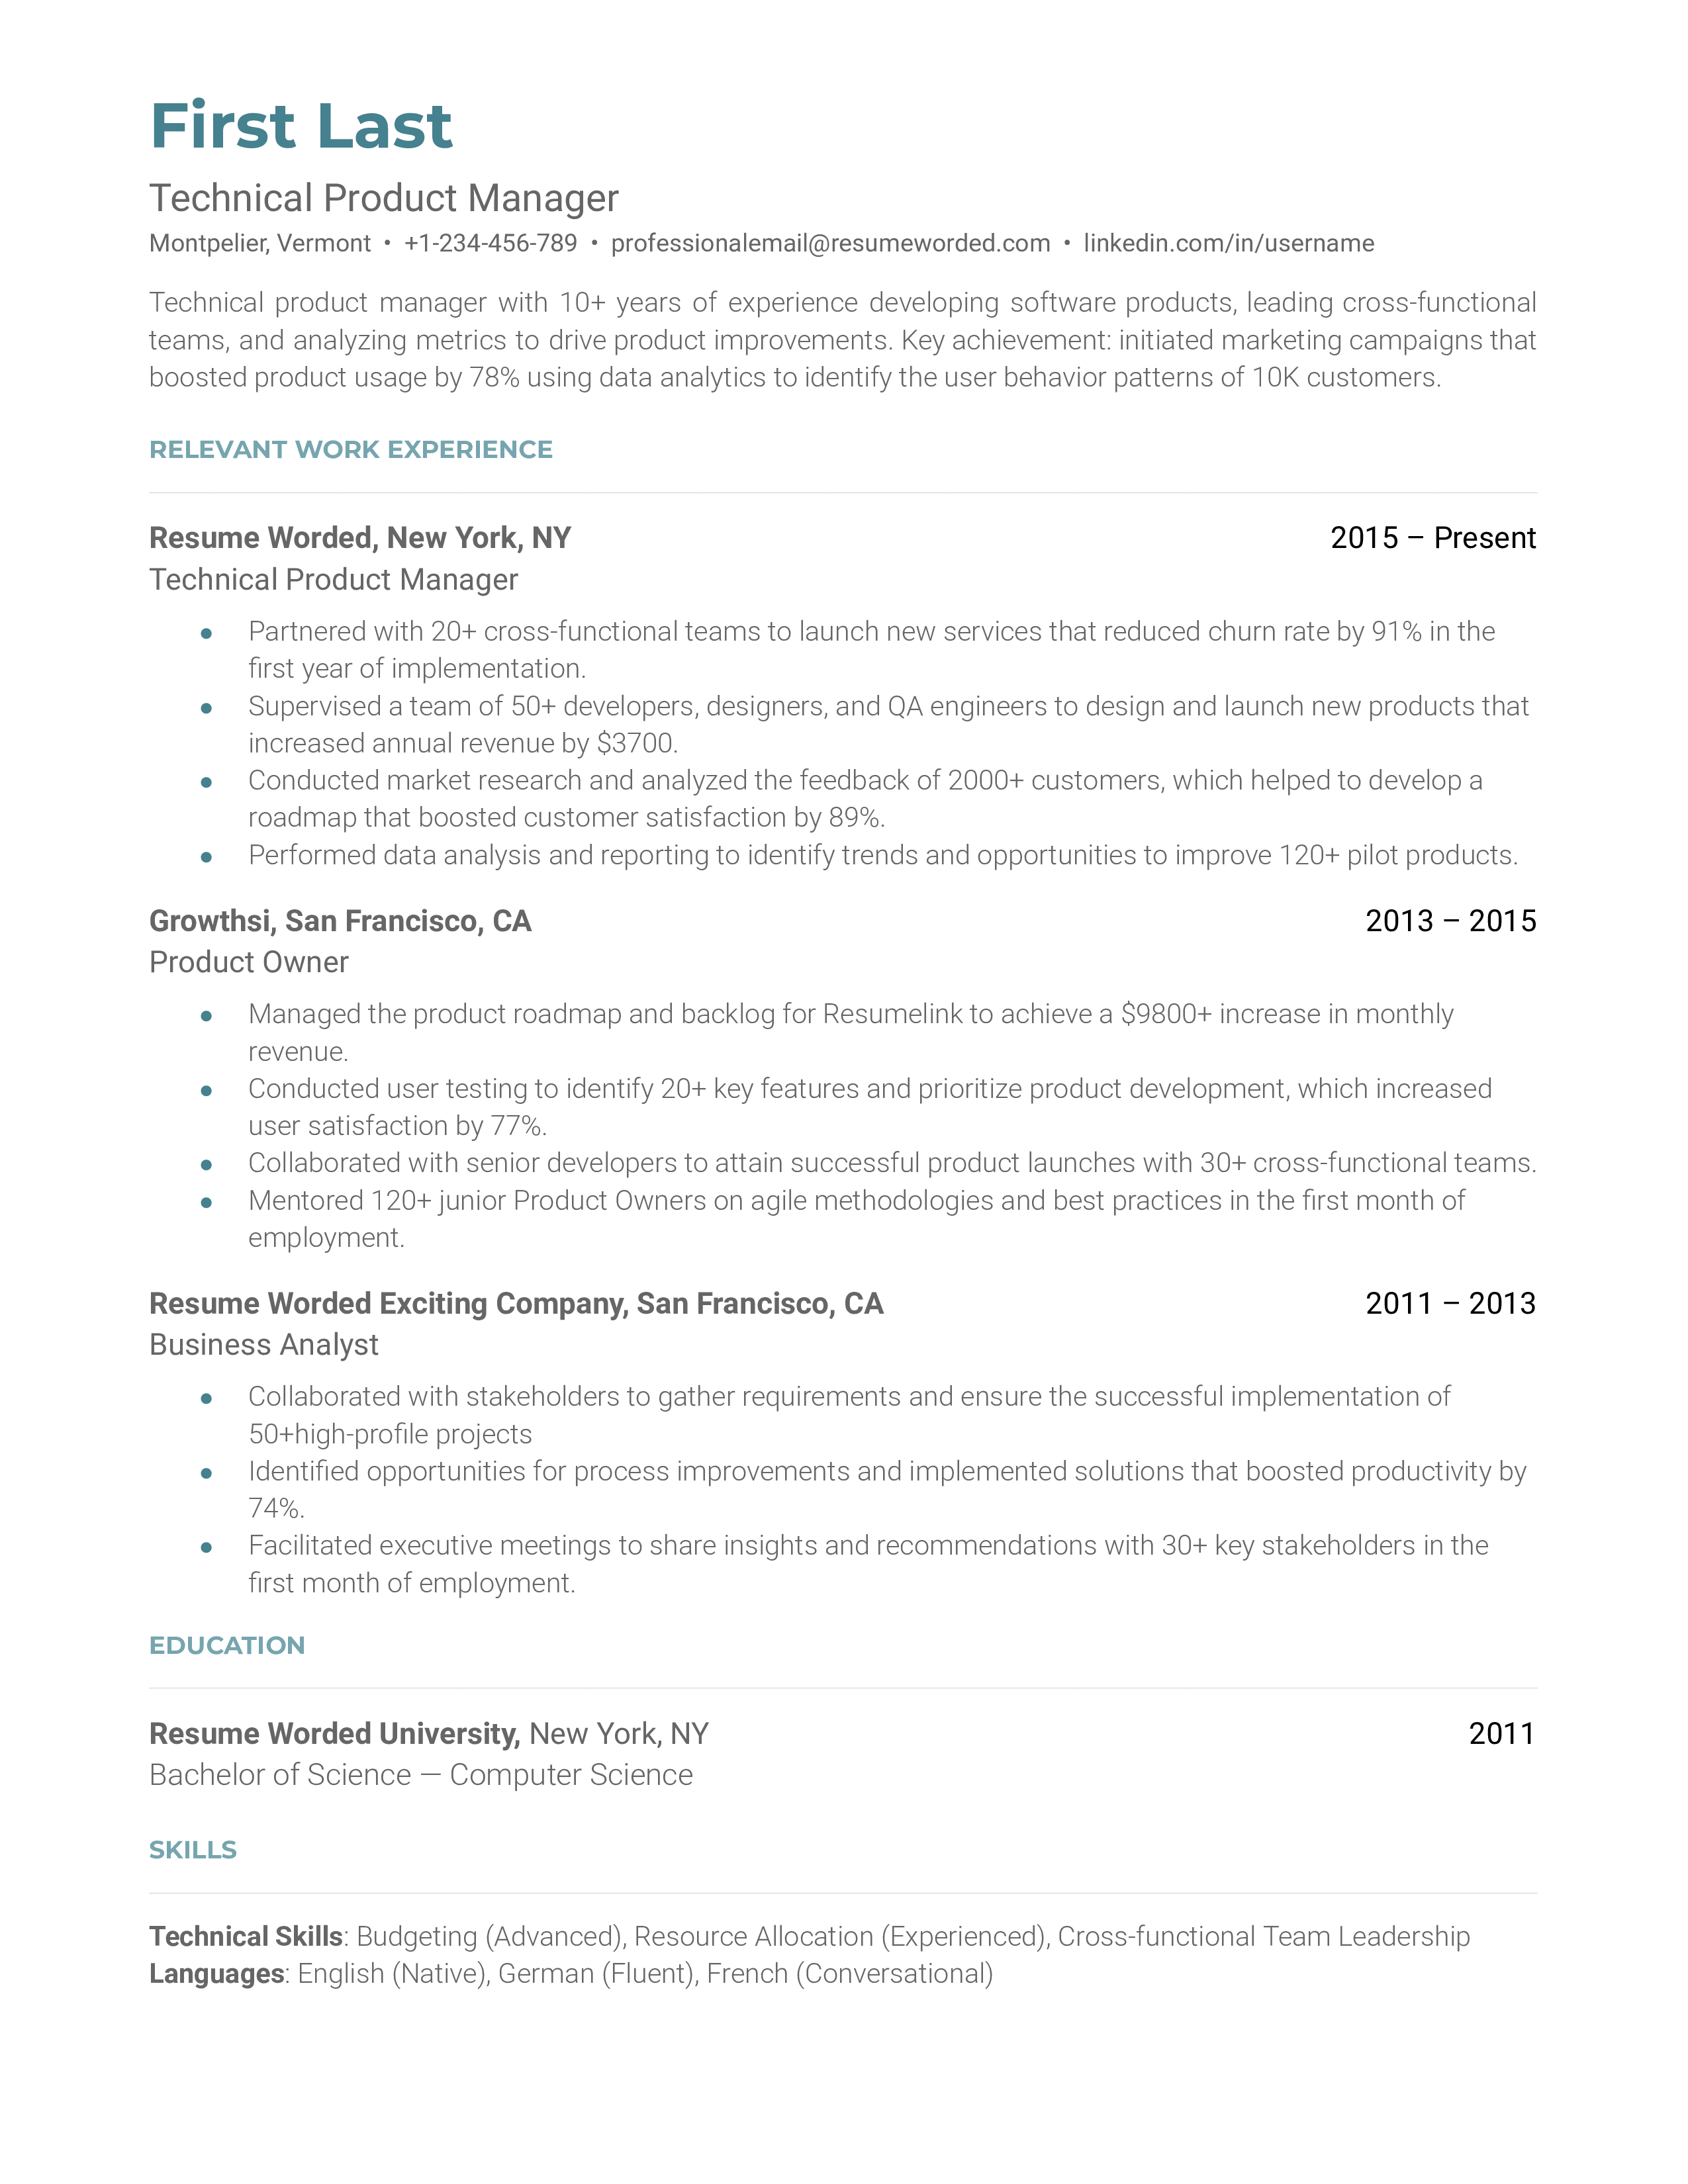 Technical Product Manager resume showcasing expertise and achievements.